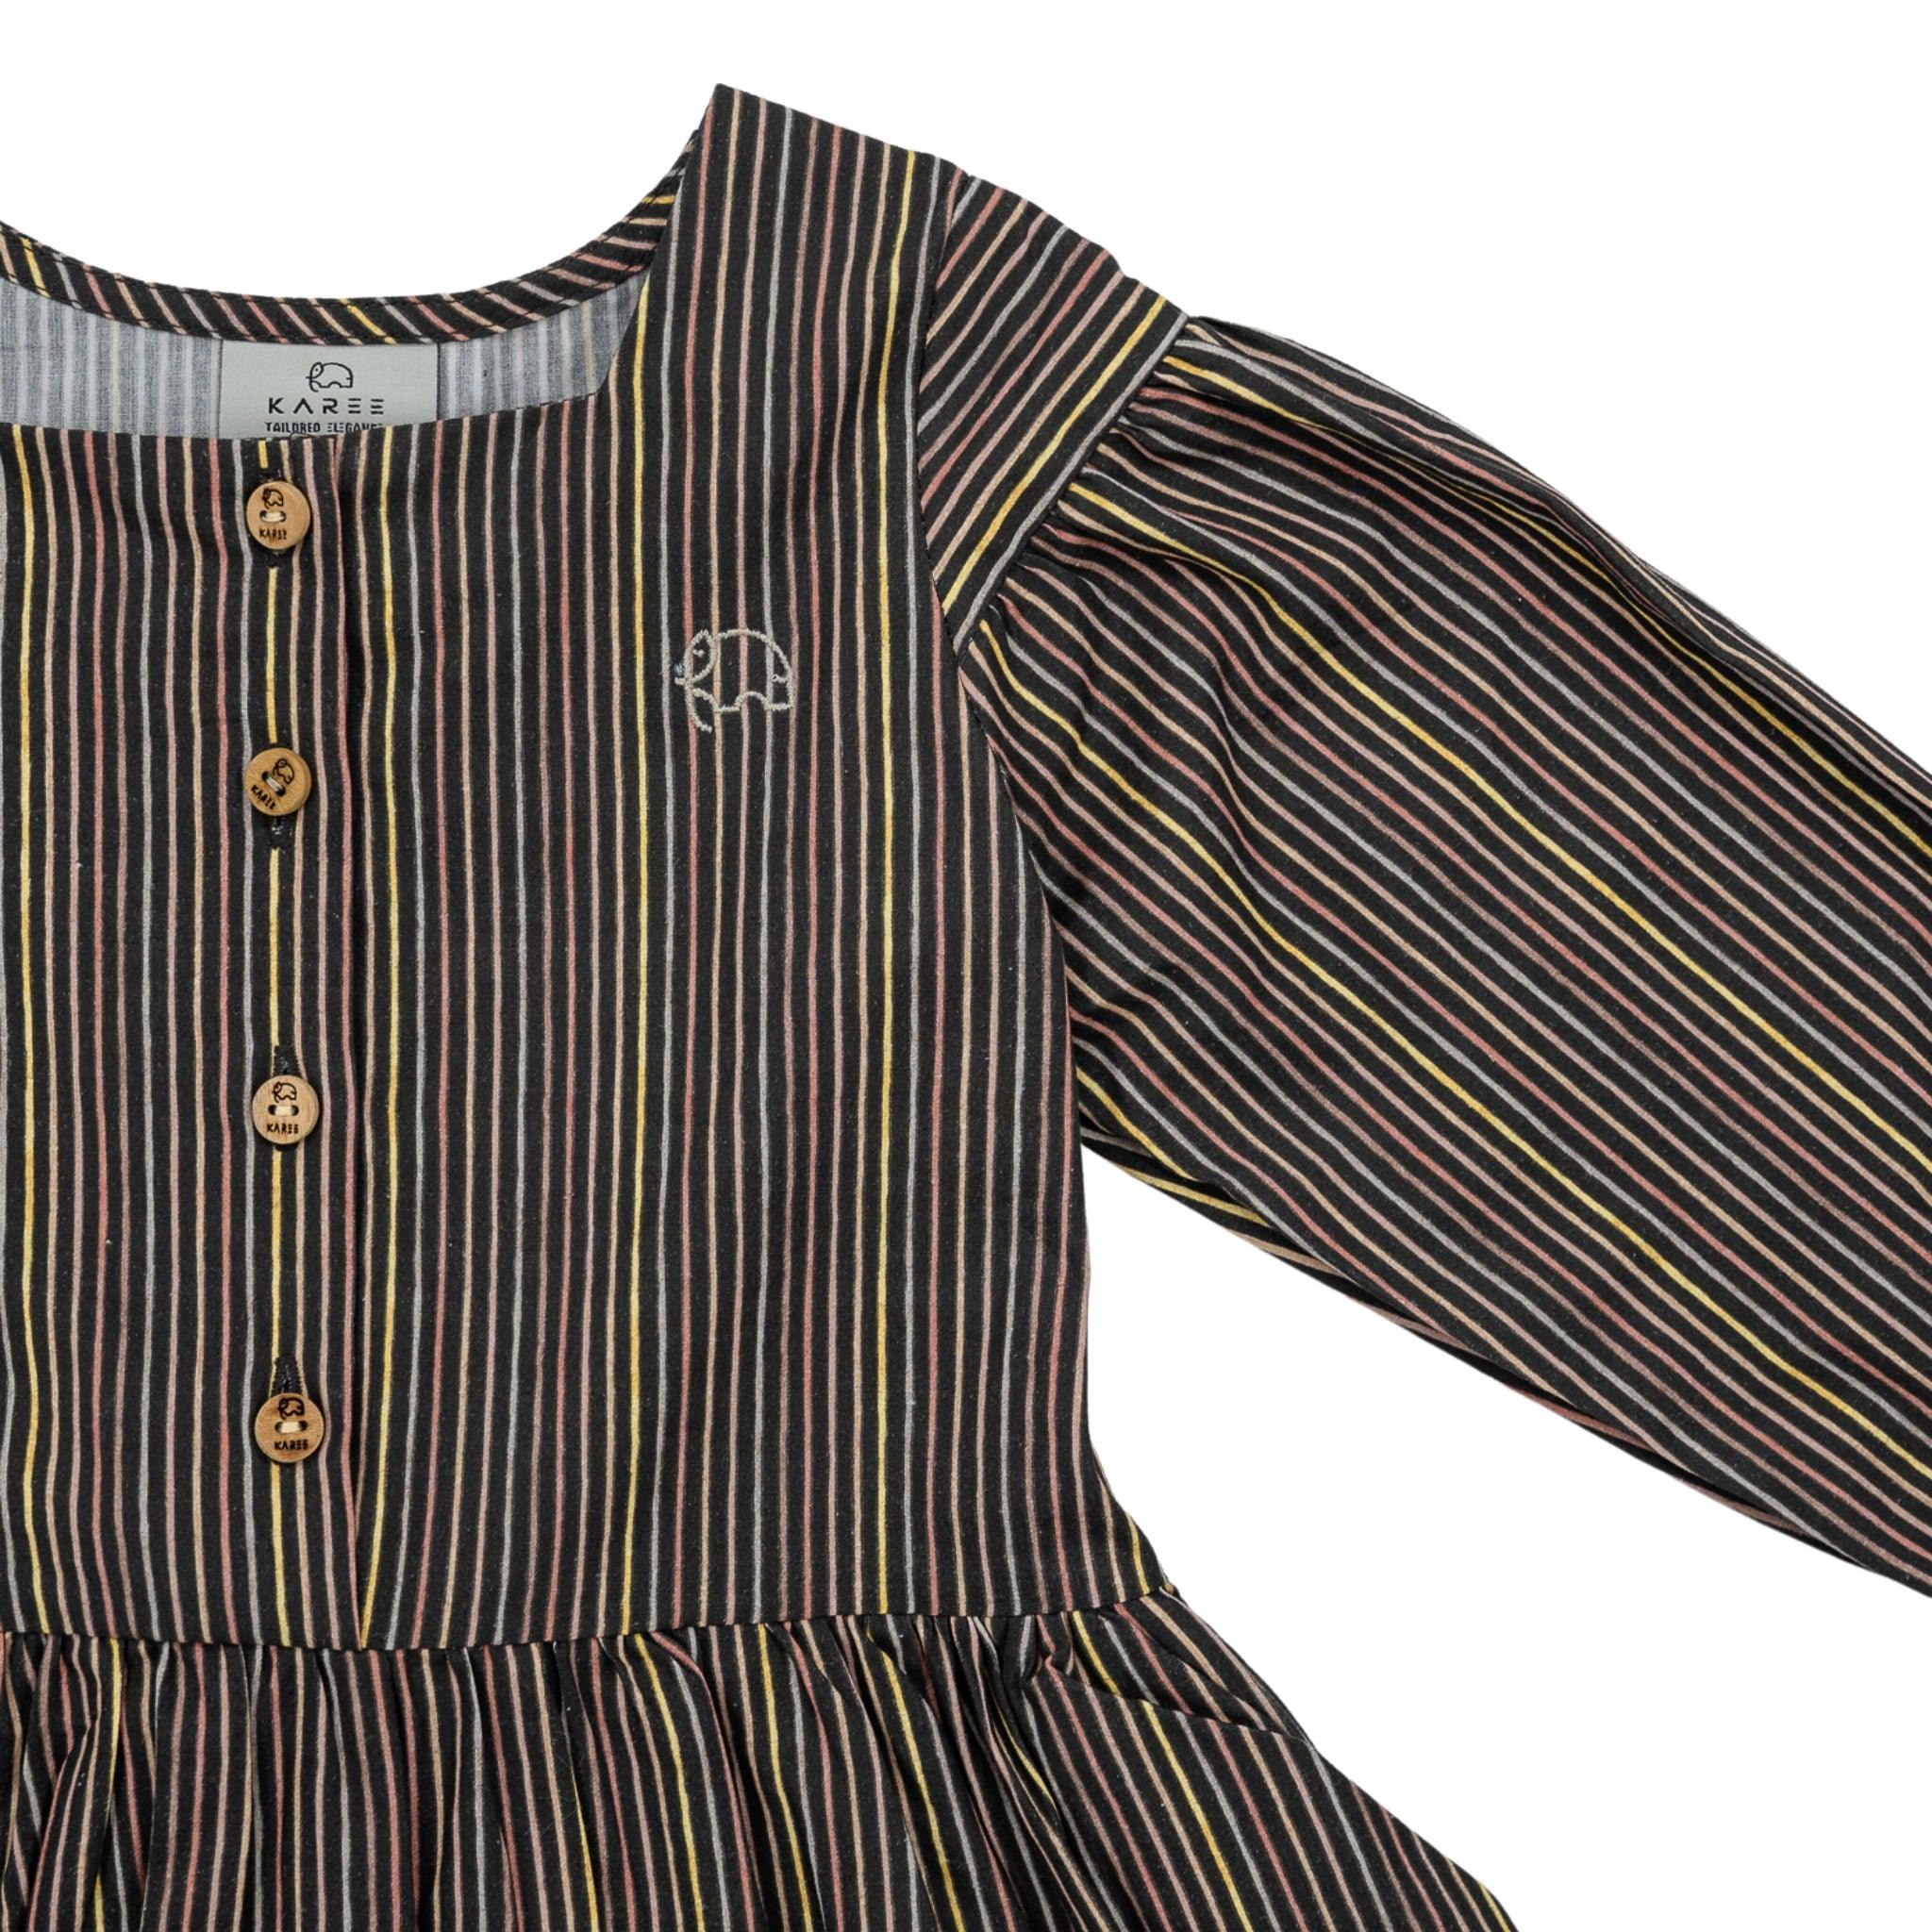 Karee's Black Striped Full sleeve Cotton Dress with long sleeves, button front, and monogram detail on the chest.